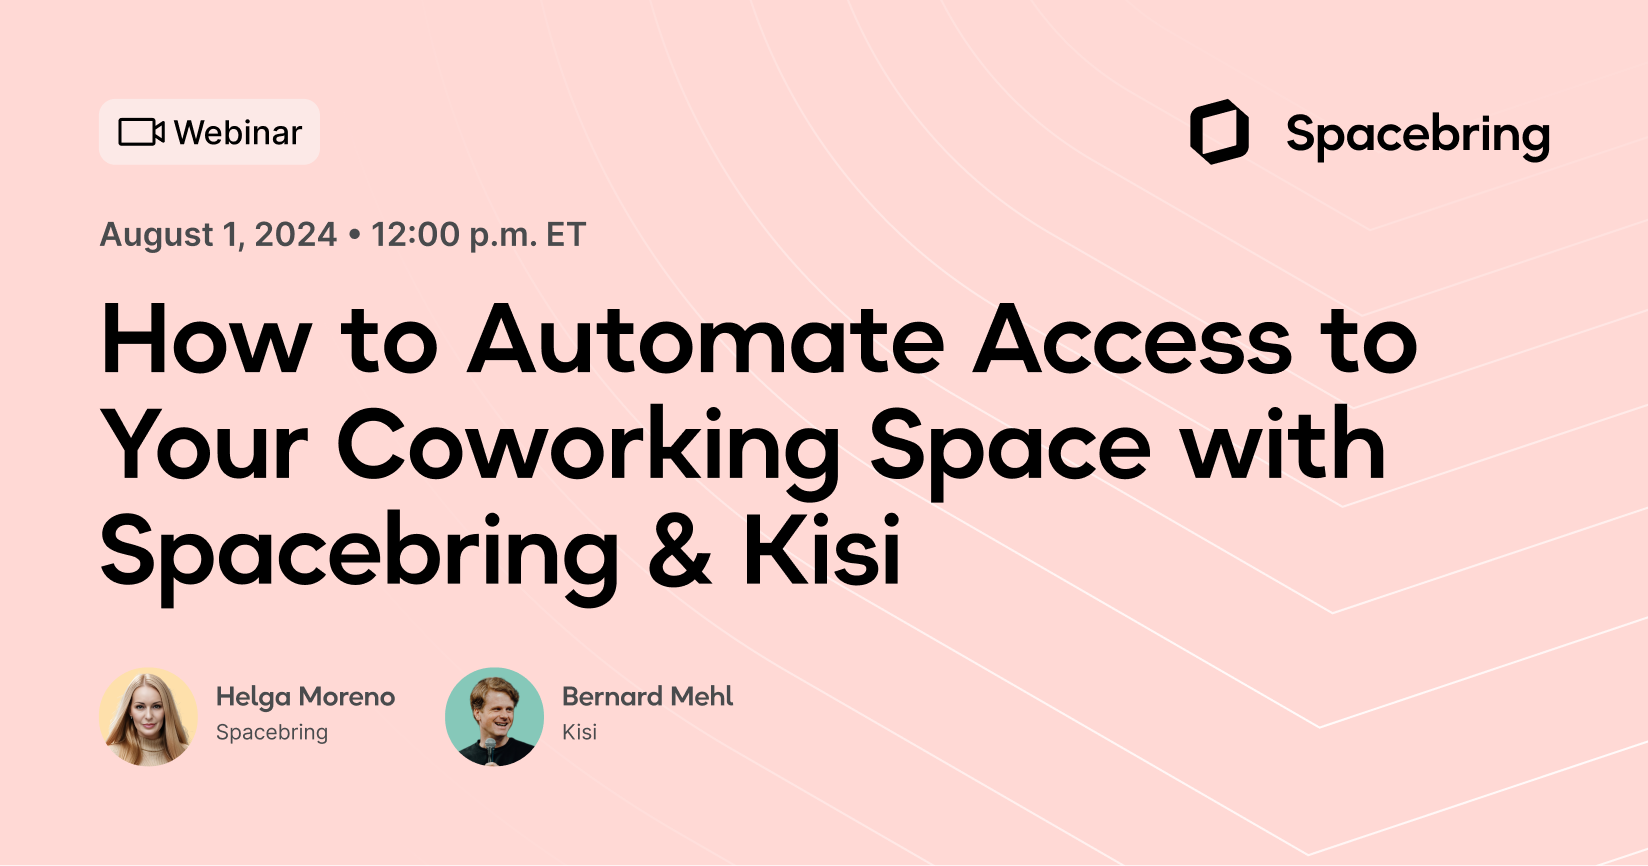 How to Automate Access to Your Coworking Space with Spacebring & Kisi